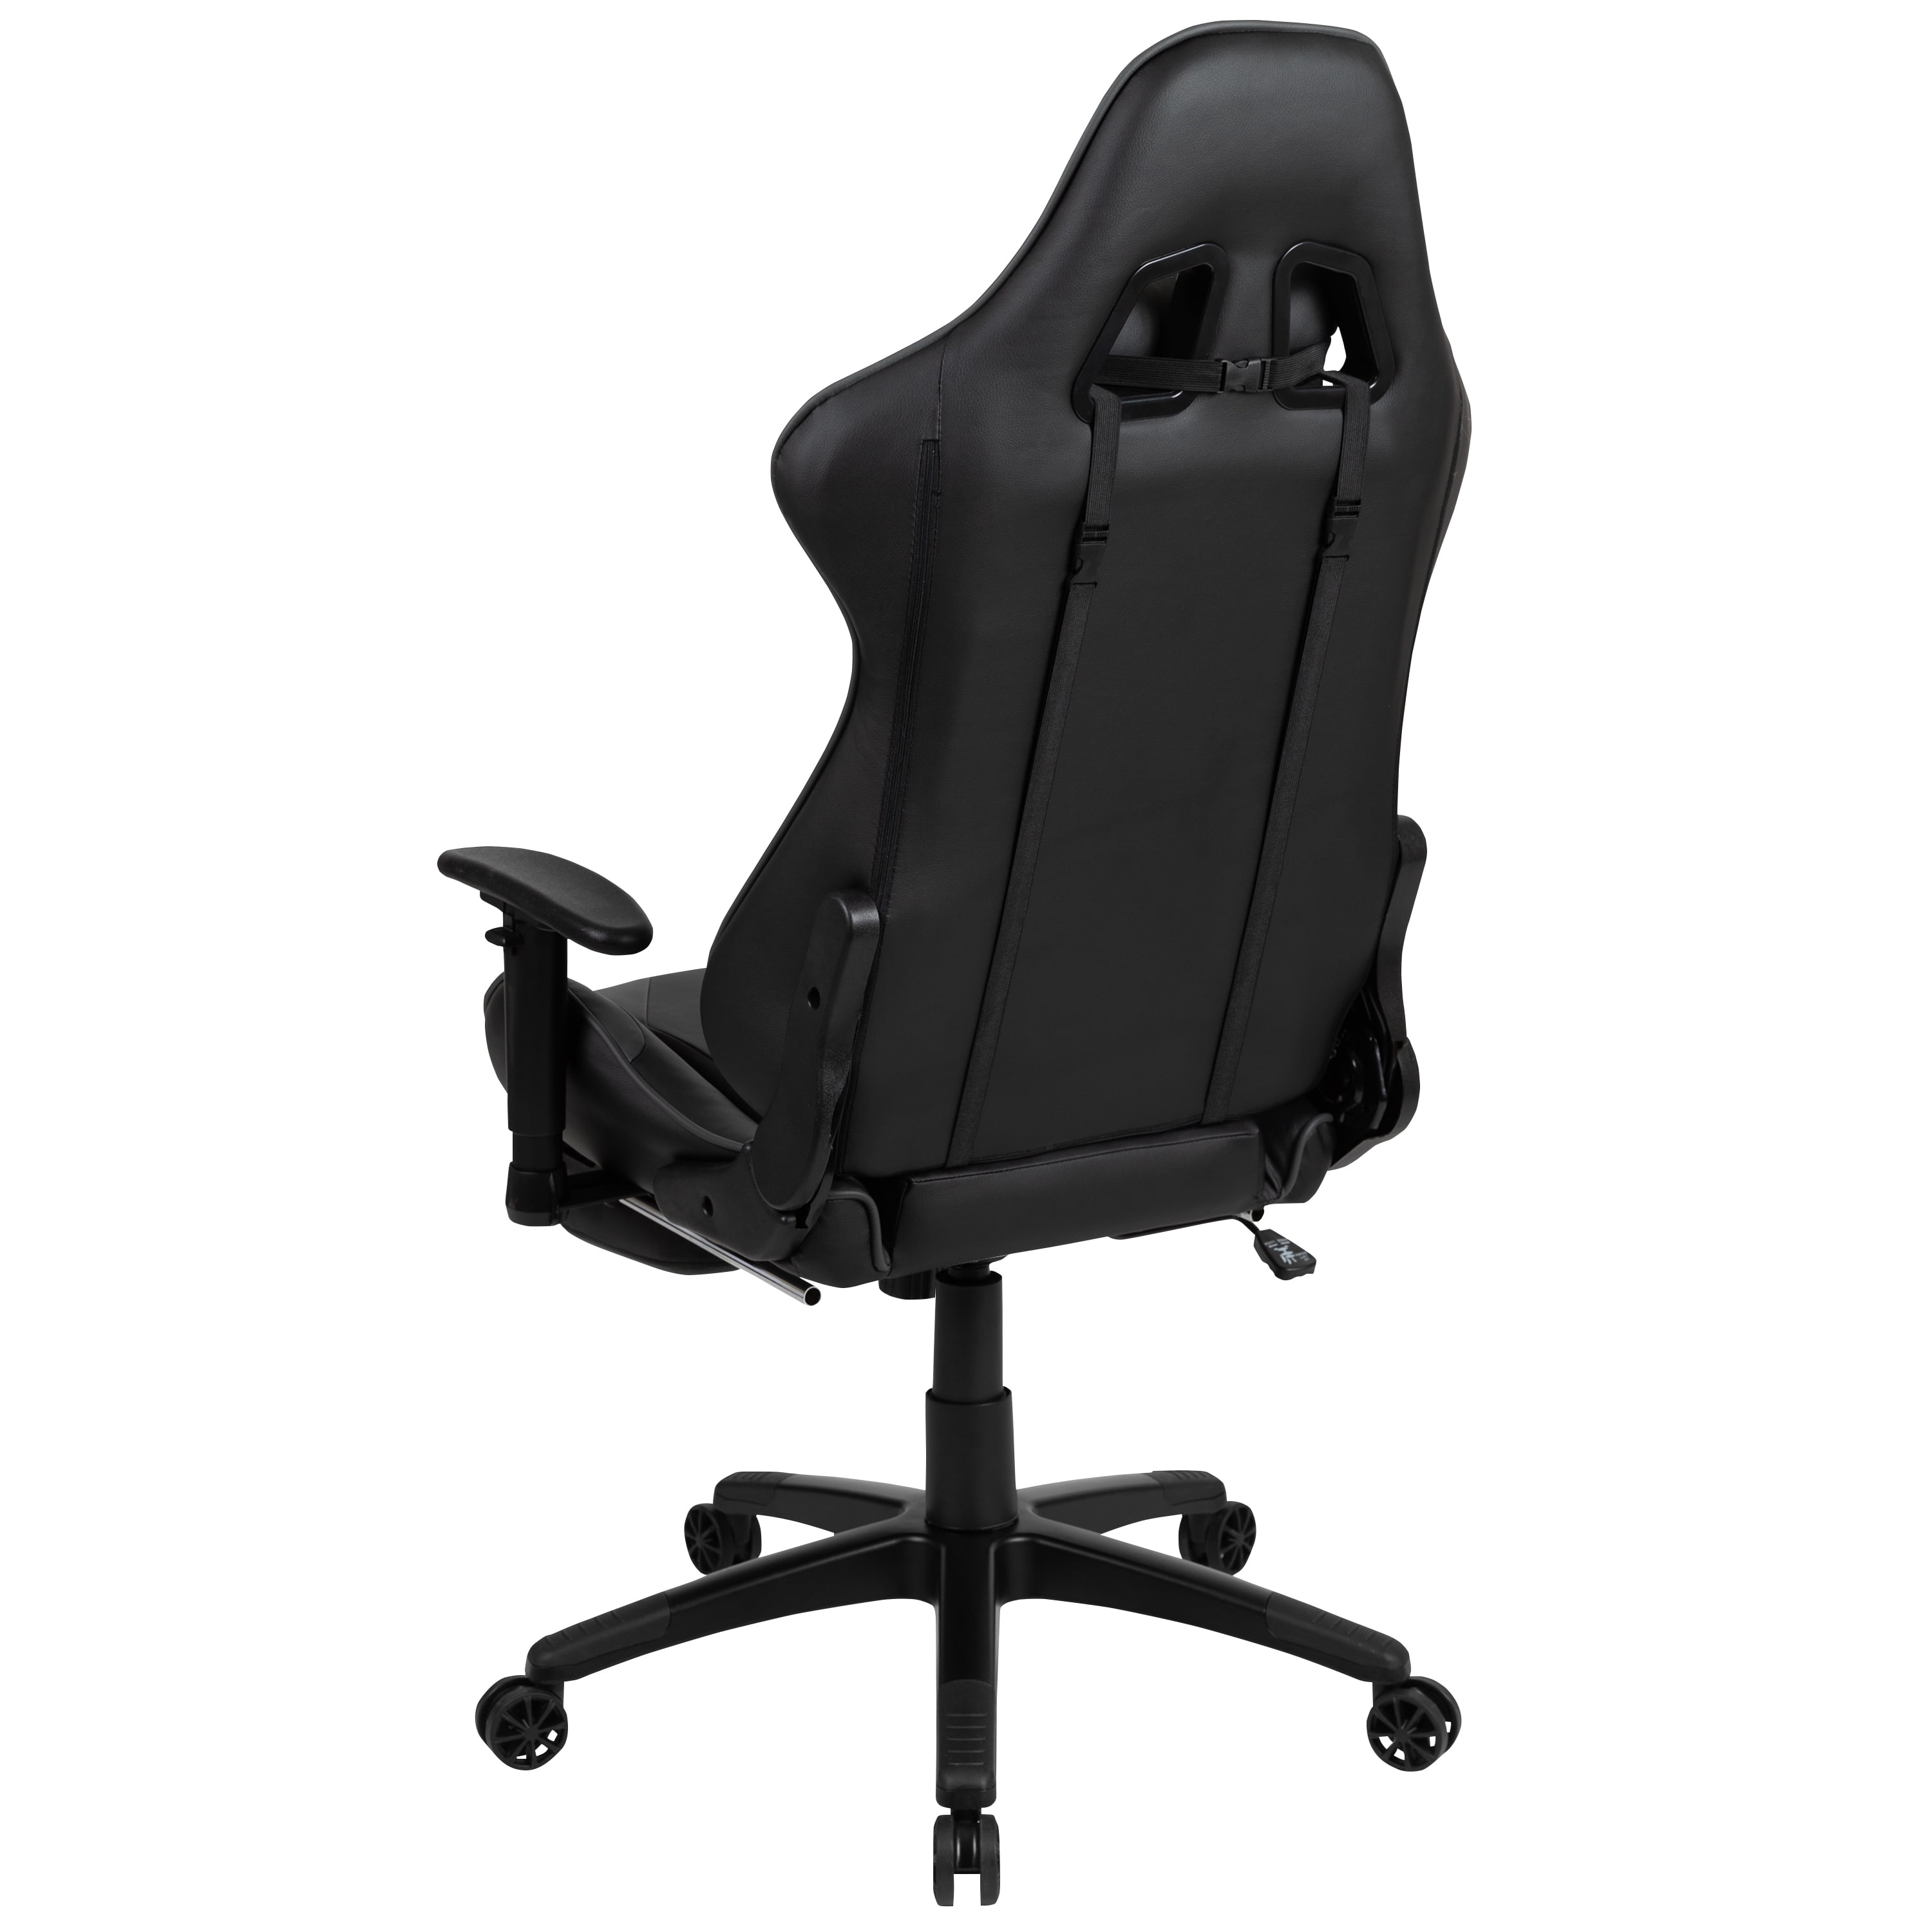 Girl Gamer Chair  Game Player Walmart Foot Stool Office Works  Fauteuil Cadeira Gamer 5 Wheels (MS-908) - China Folding Gaming Chair, Adx  Gaming Chair